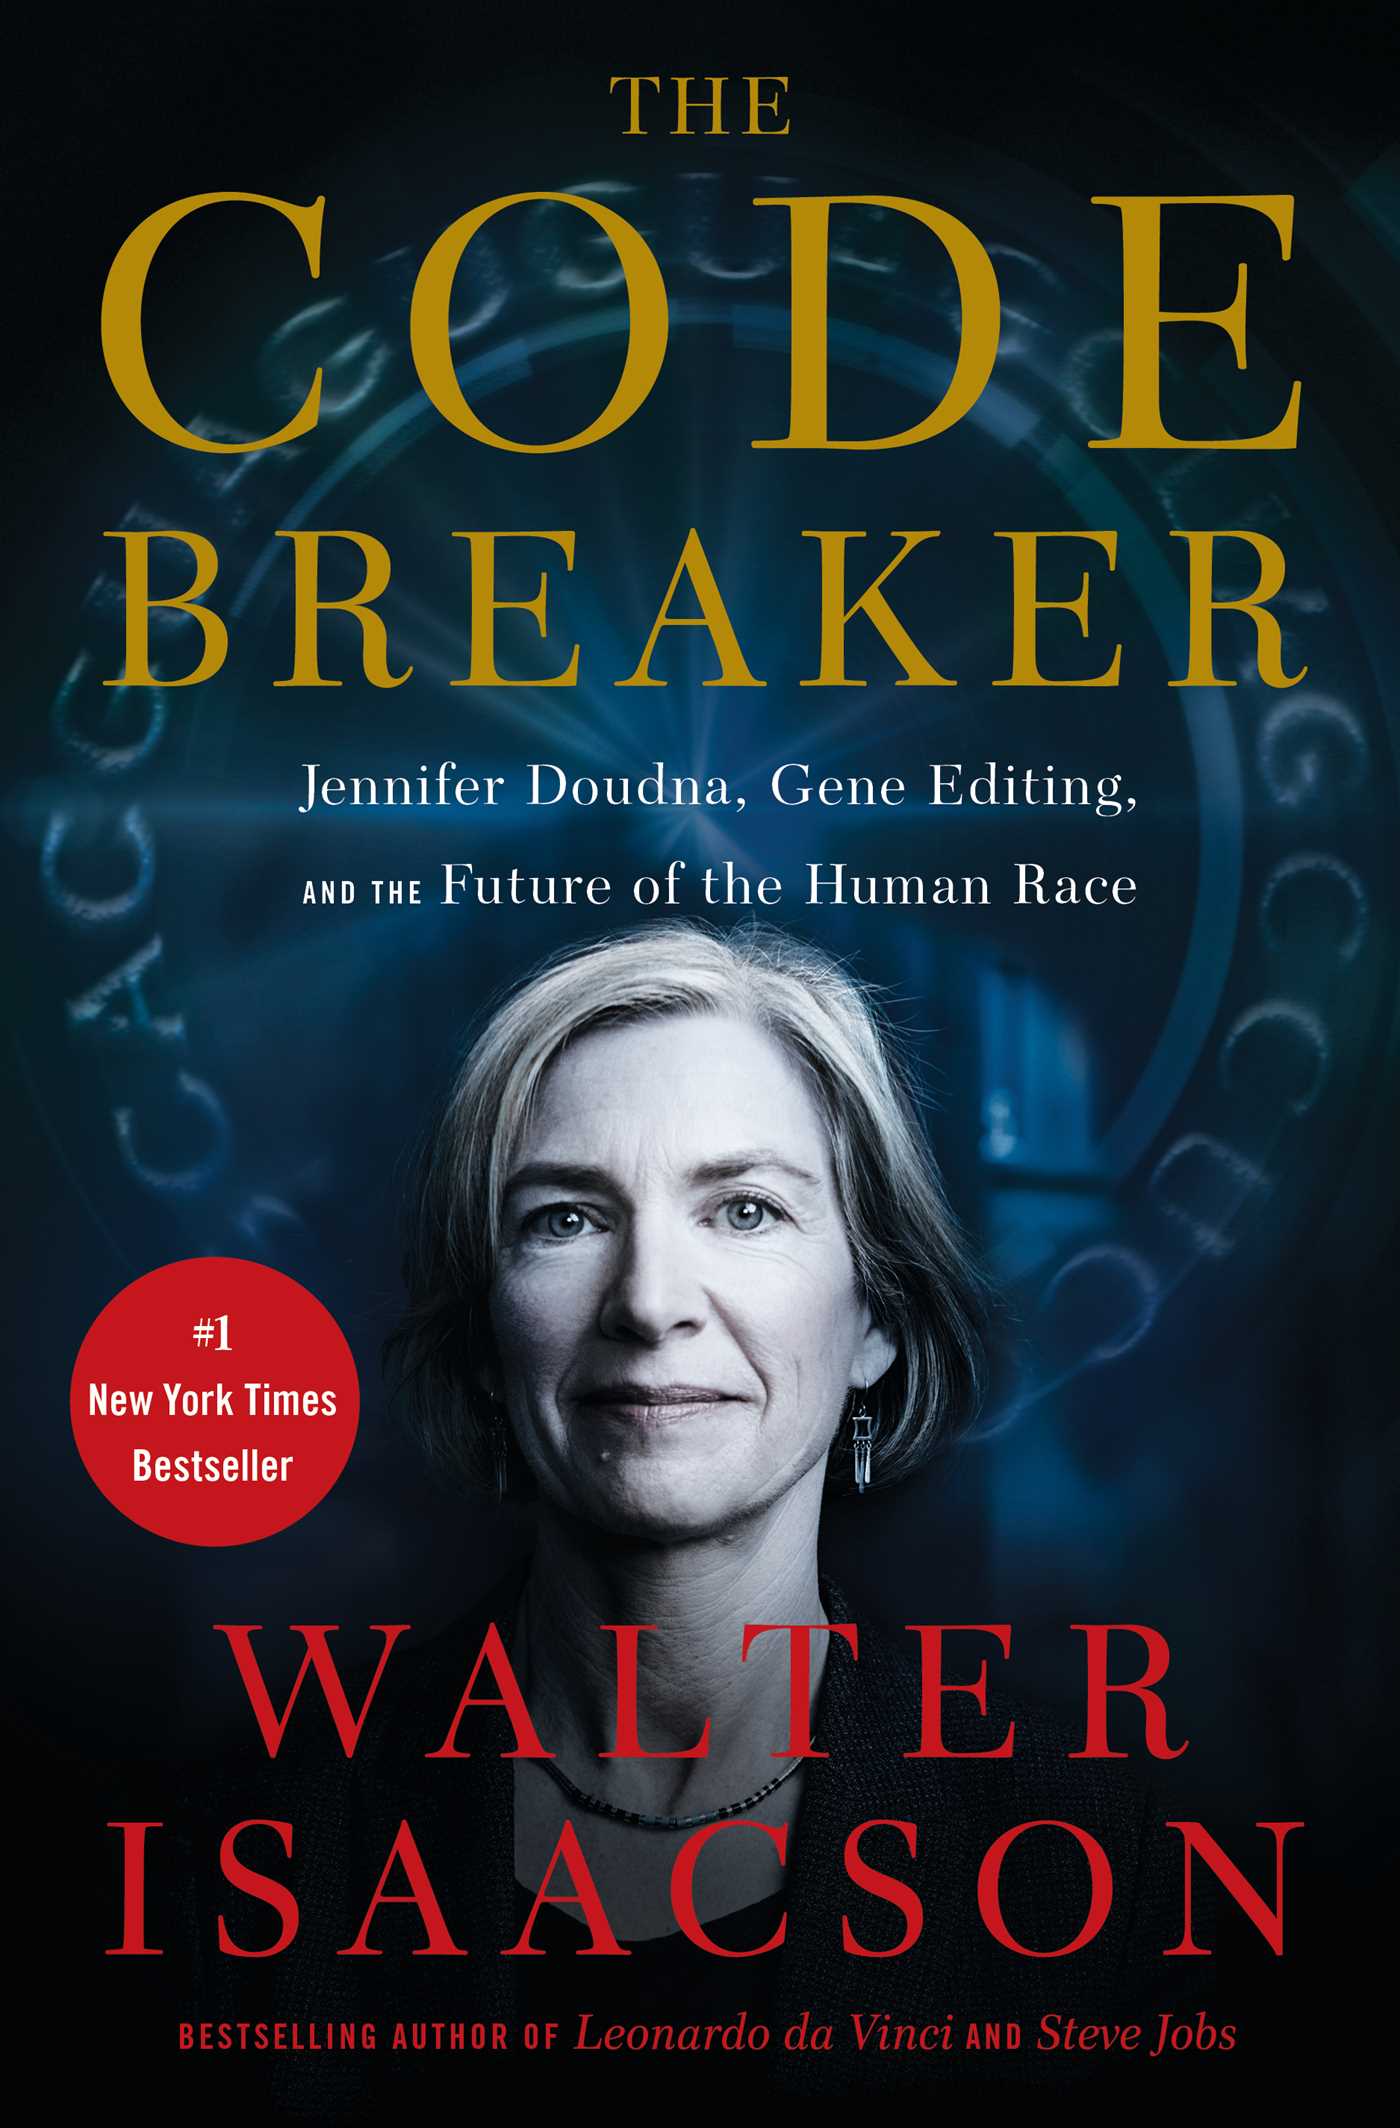 Cover of "The Code Breaker by Walter Isaacson